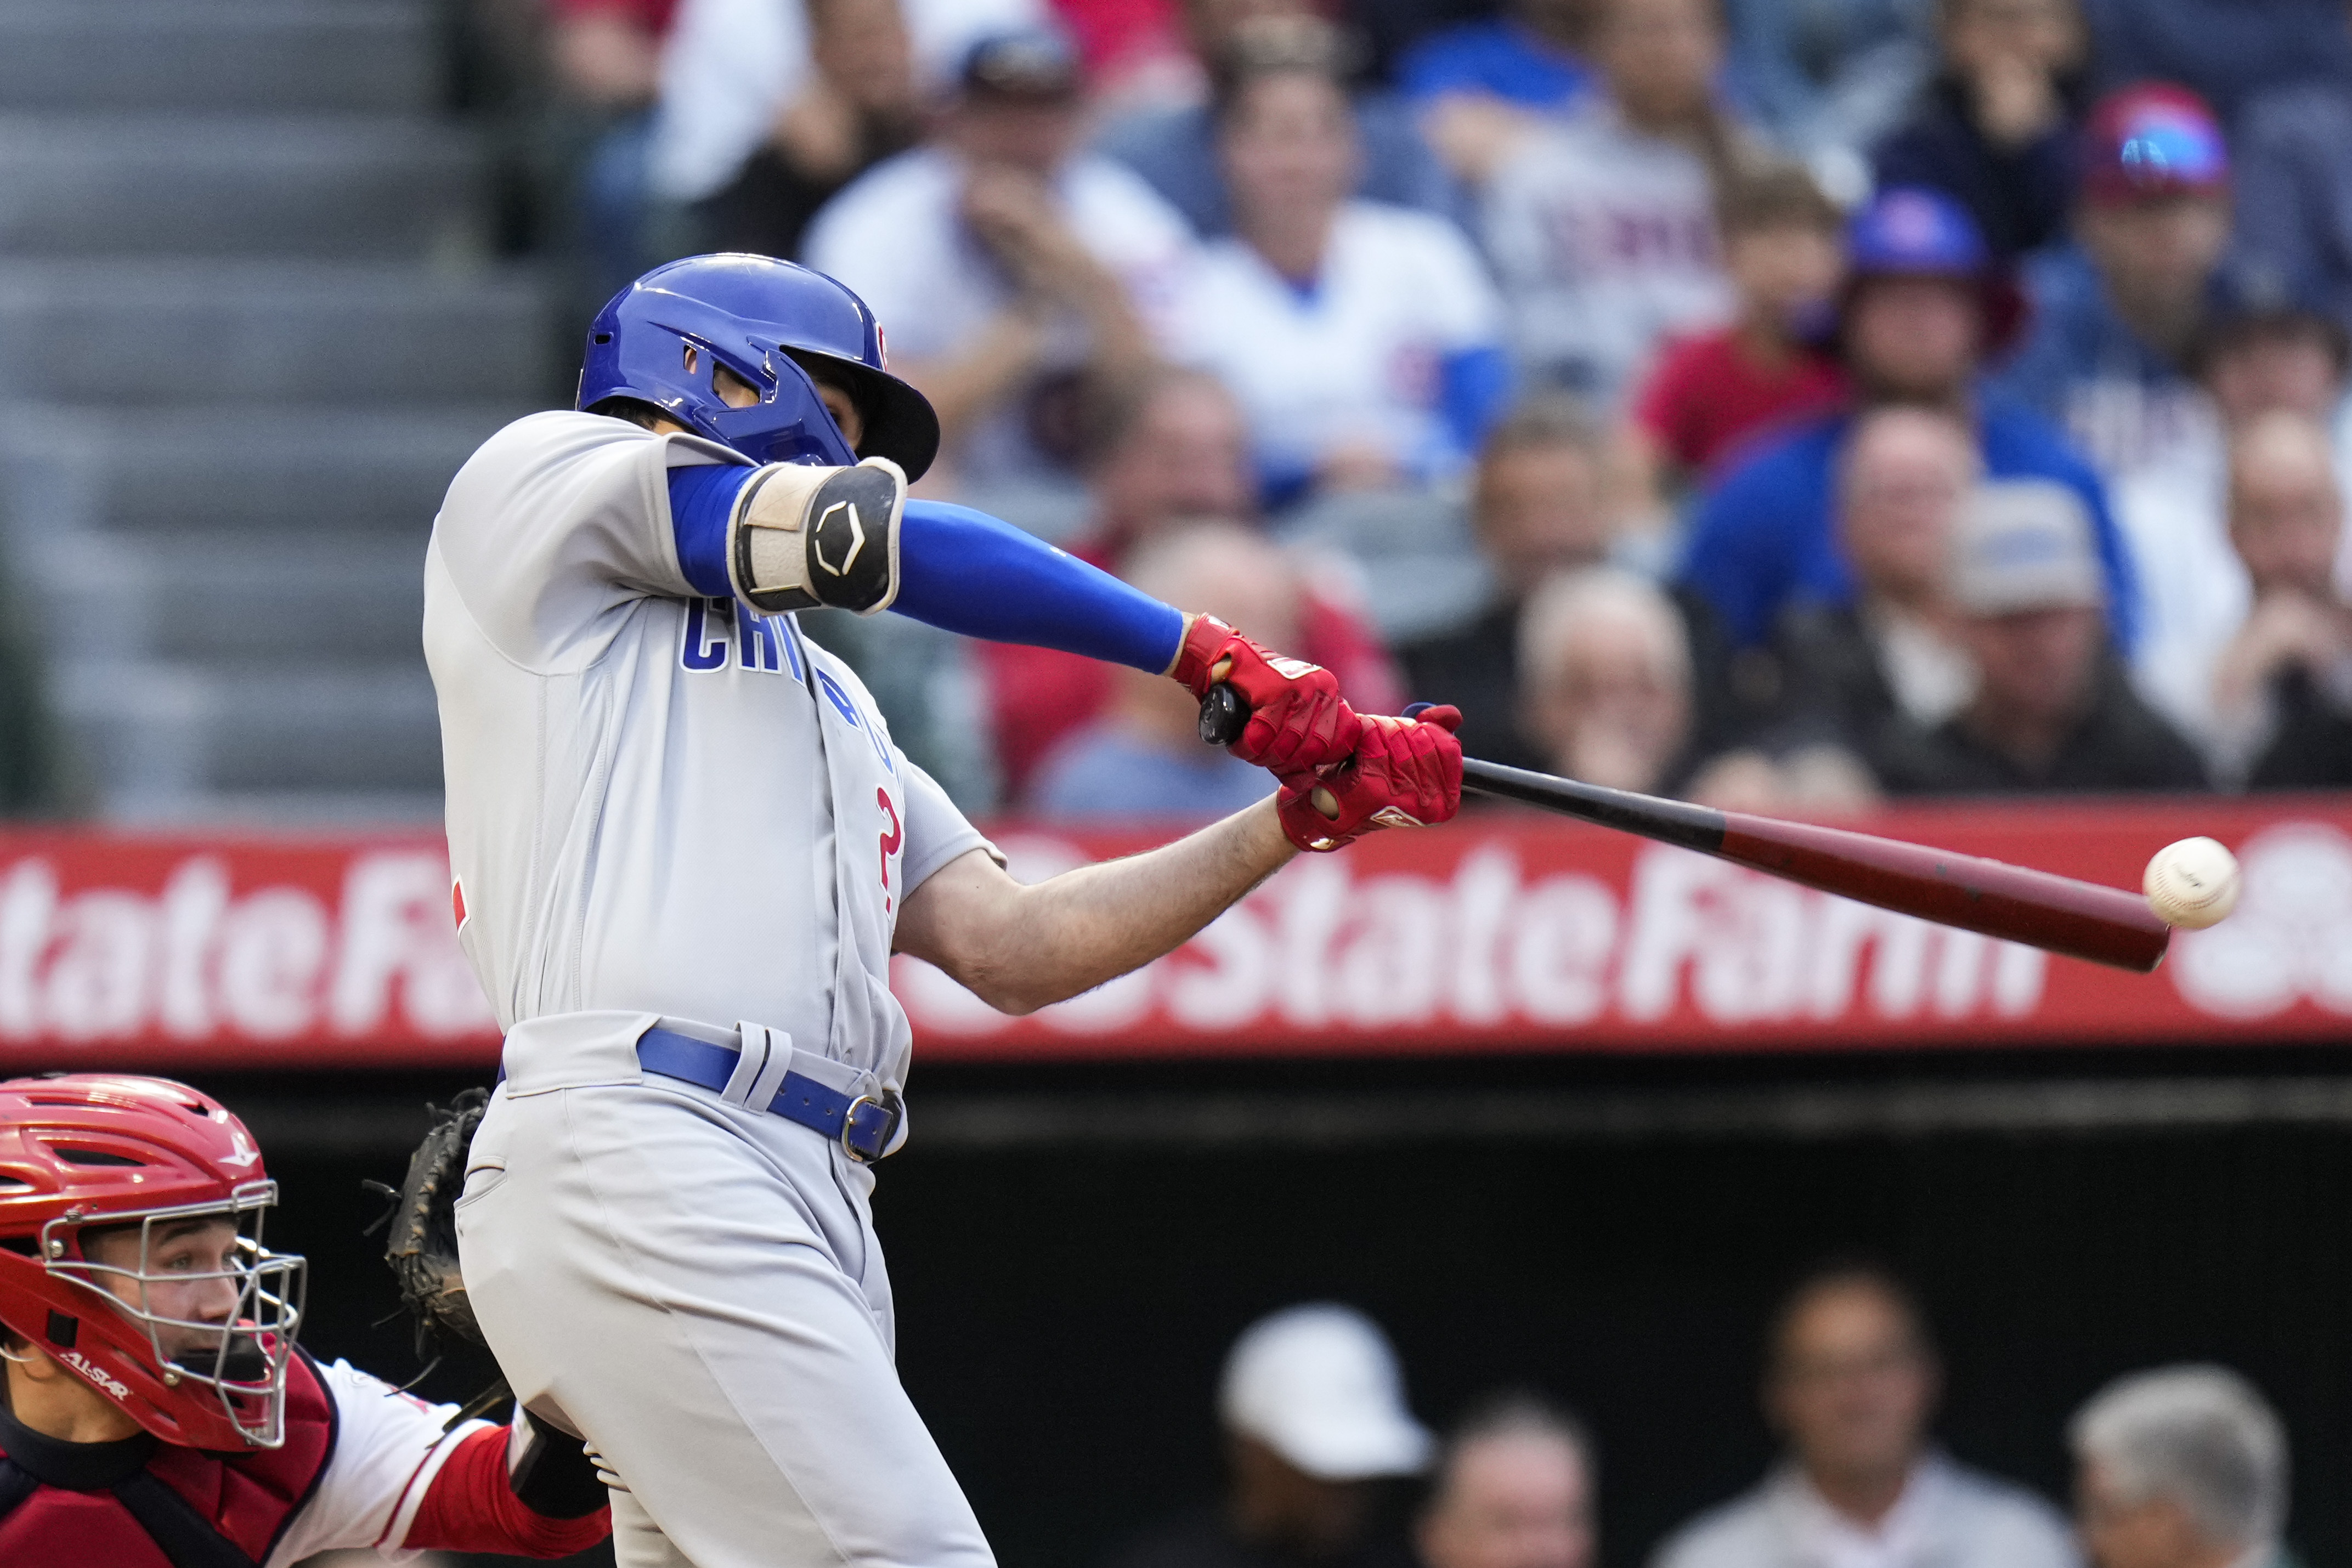 Column: Chicago Cubs need to play Christopher Morel every day